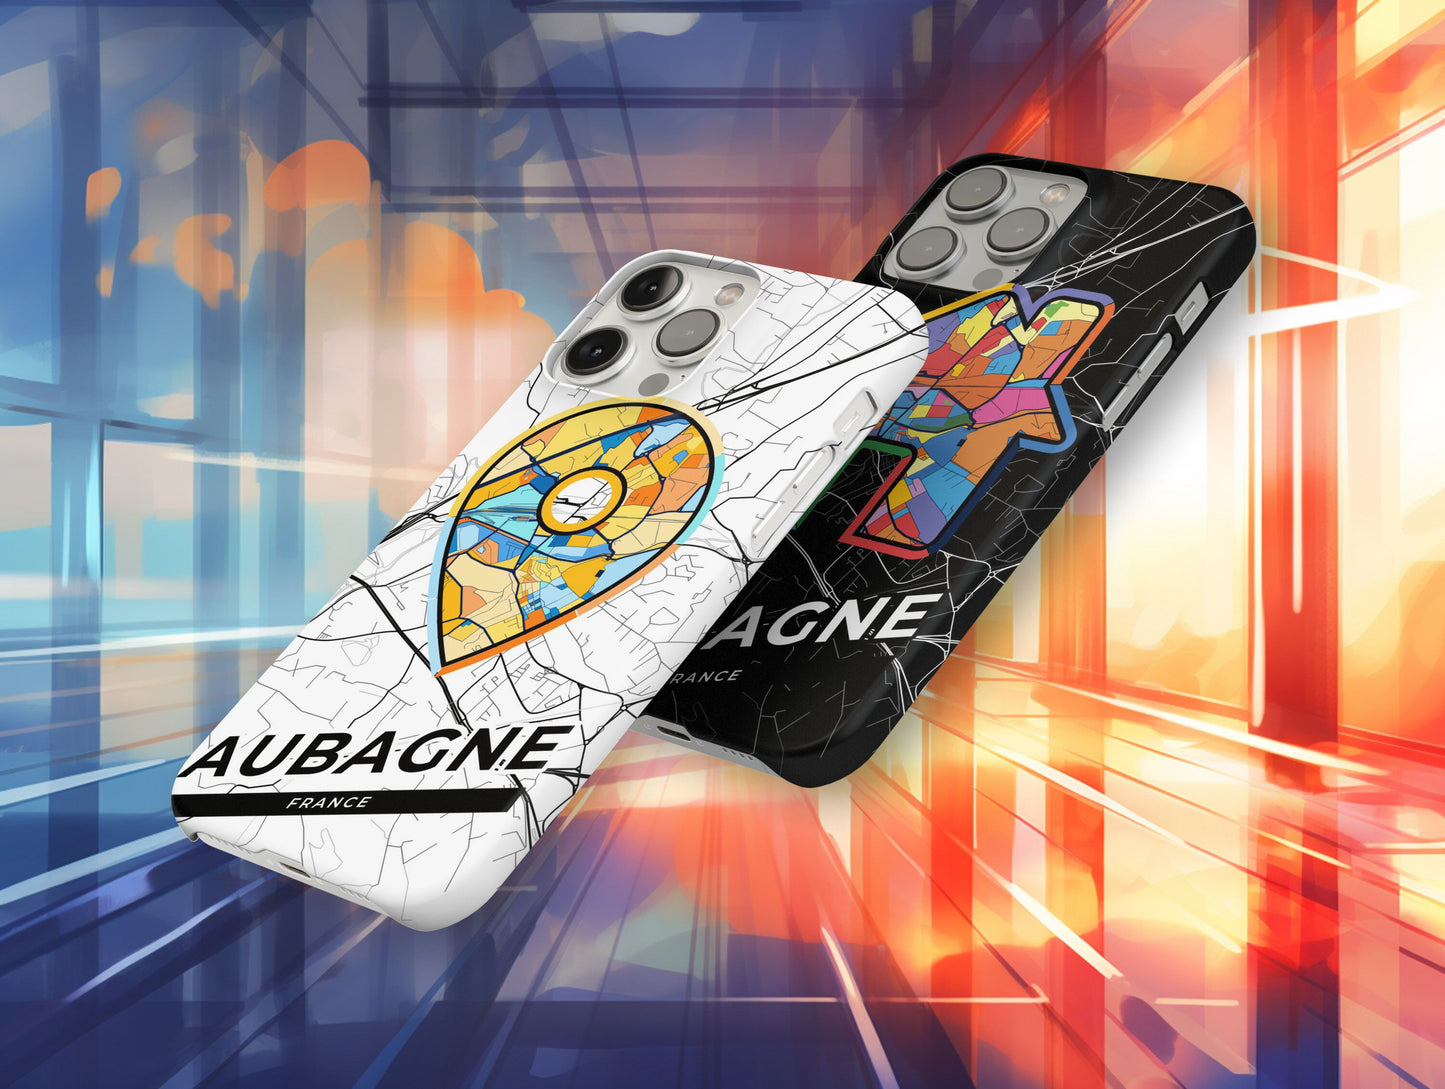 Aubagne France slim phone case with colorful icon. Birthday, wedding or housewarming gift. Couple match cases.